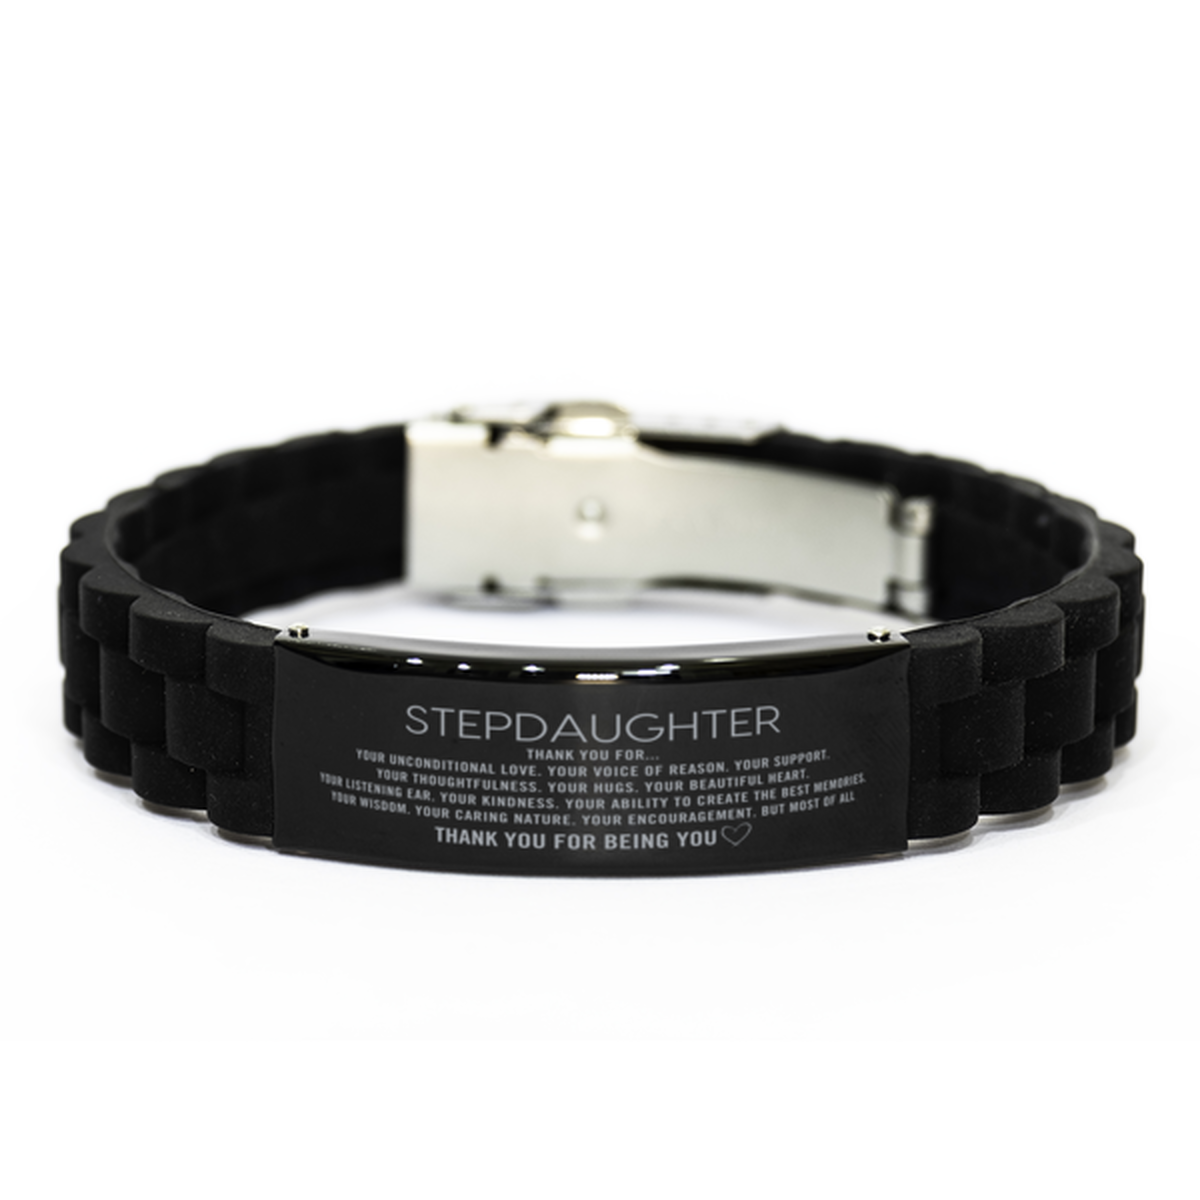 Stepdaughter Black Glidelock Clasp Bracelet Custom, Engraved Gifts For Stepdaughter Christmas Graduation Birthday Gifts for Men Women Stepdaughter Thank you for Your unconditional love